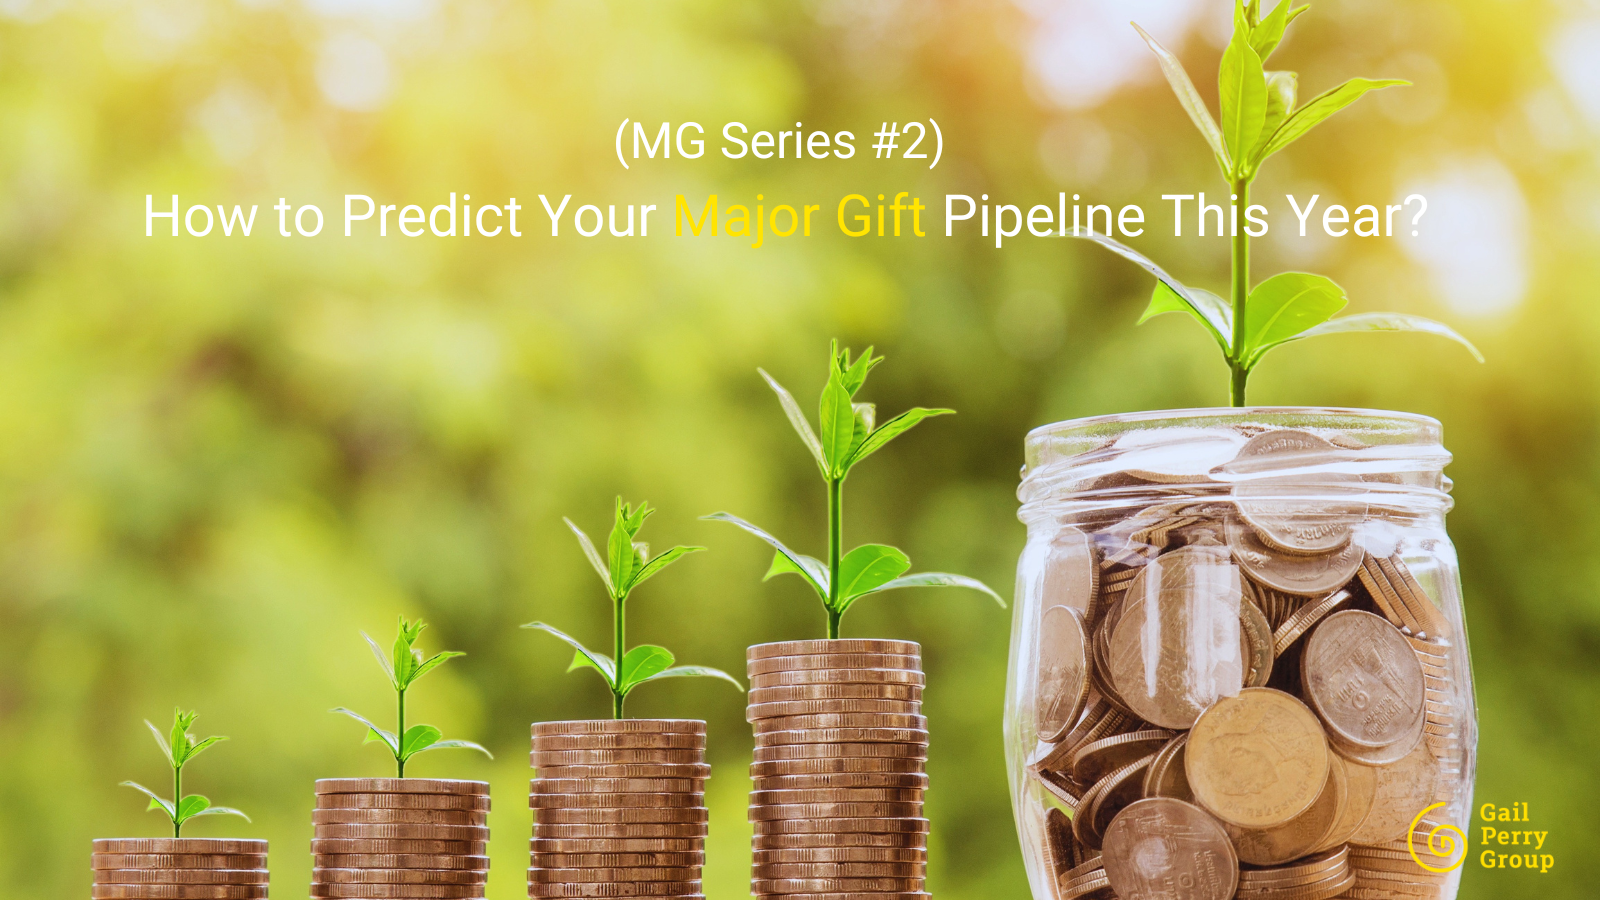 (MG Series #2) How to Predict Your Major Gift Pipeline This Year?